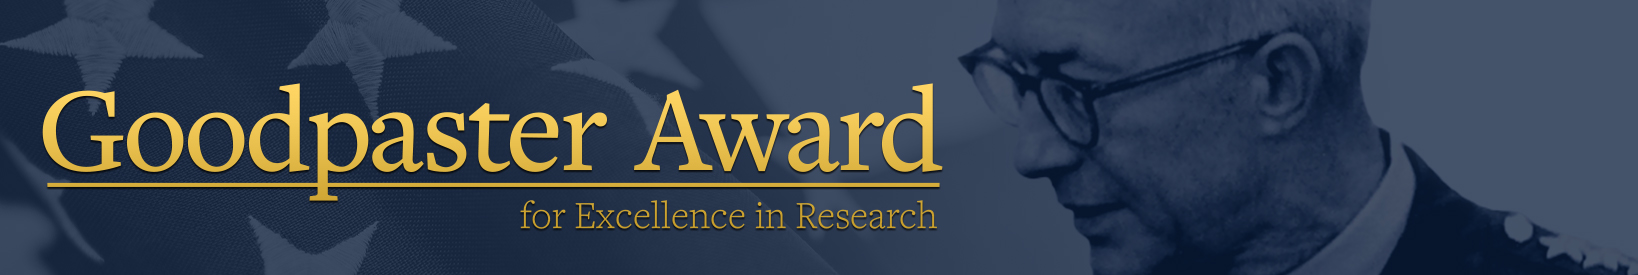 Goodpaster Award for Excellence in Research